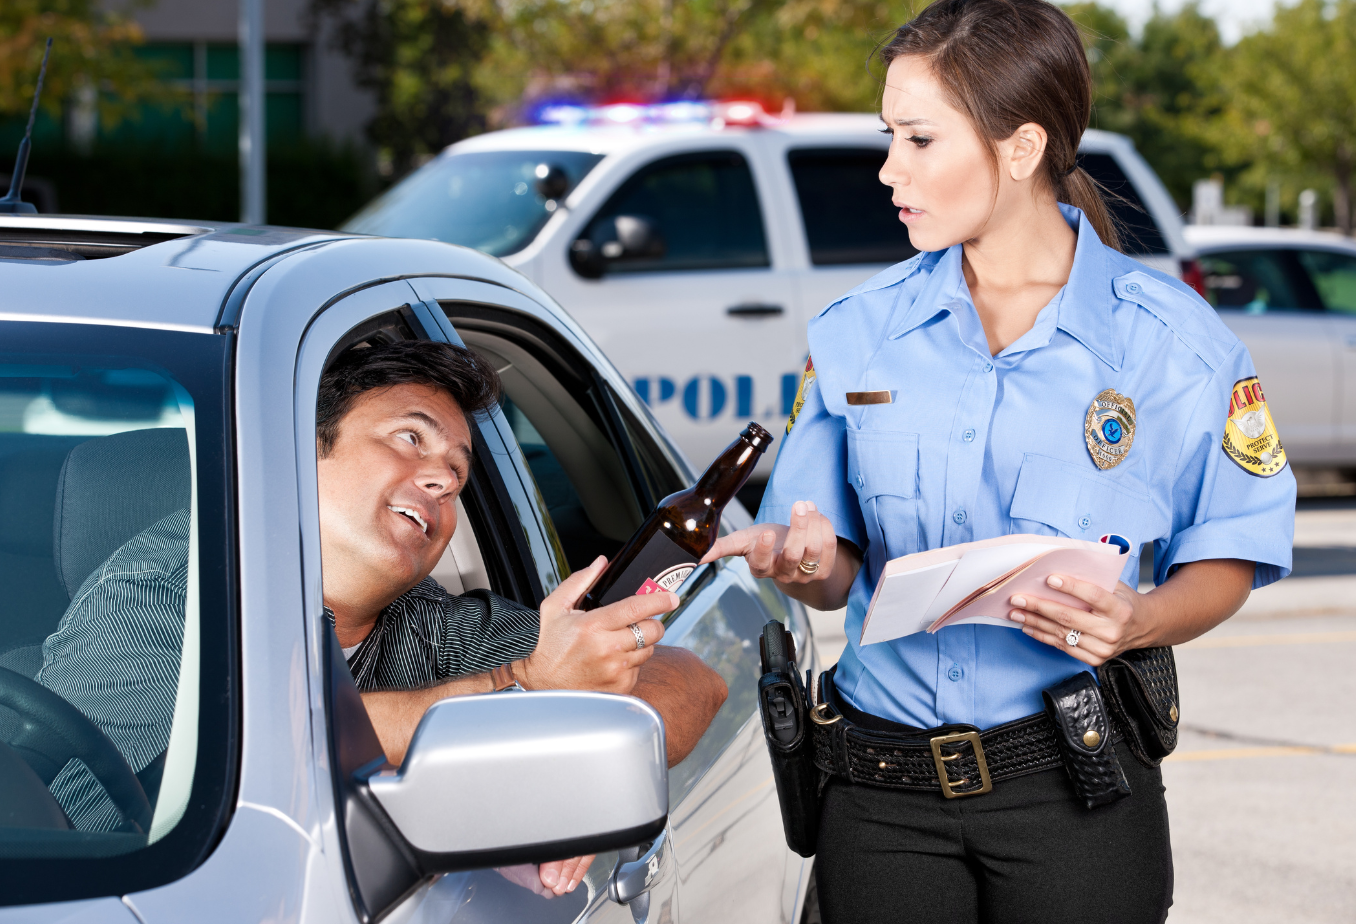 HOW TO REDUCE YOUR DUI TO RECKLESS OR NEGLIGENT DRIVING CHARGES: IS IT POSSIBLE?